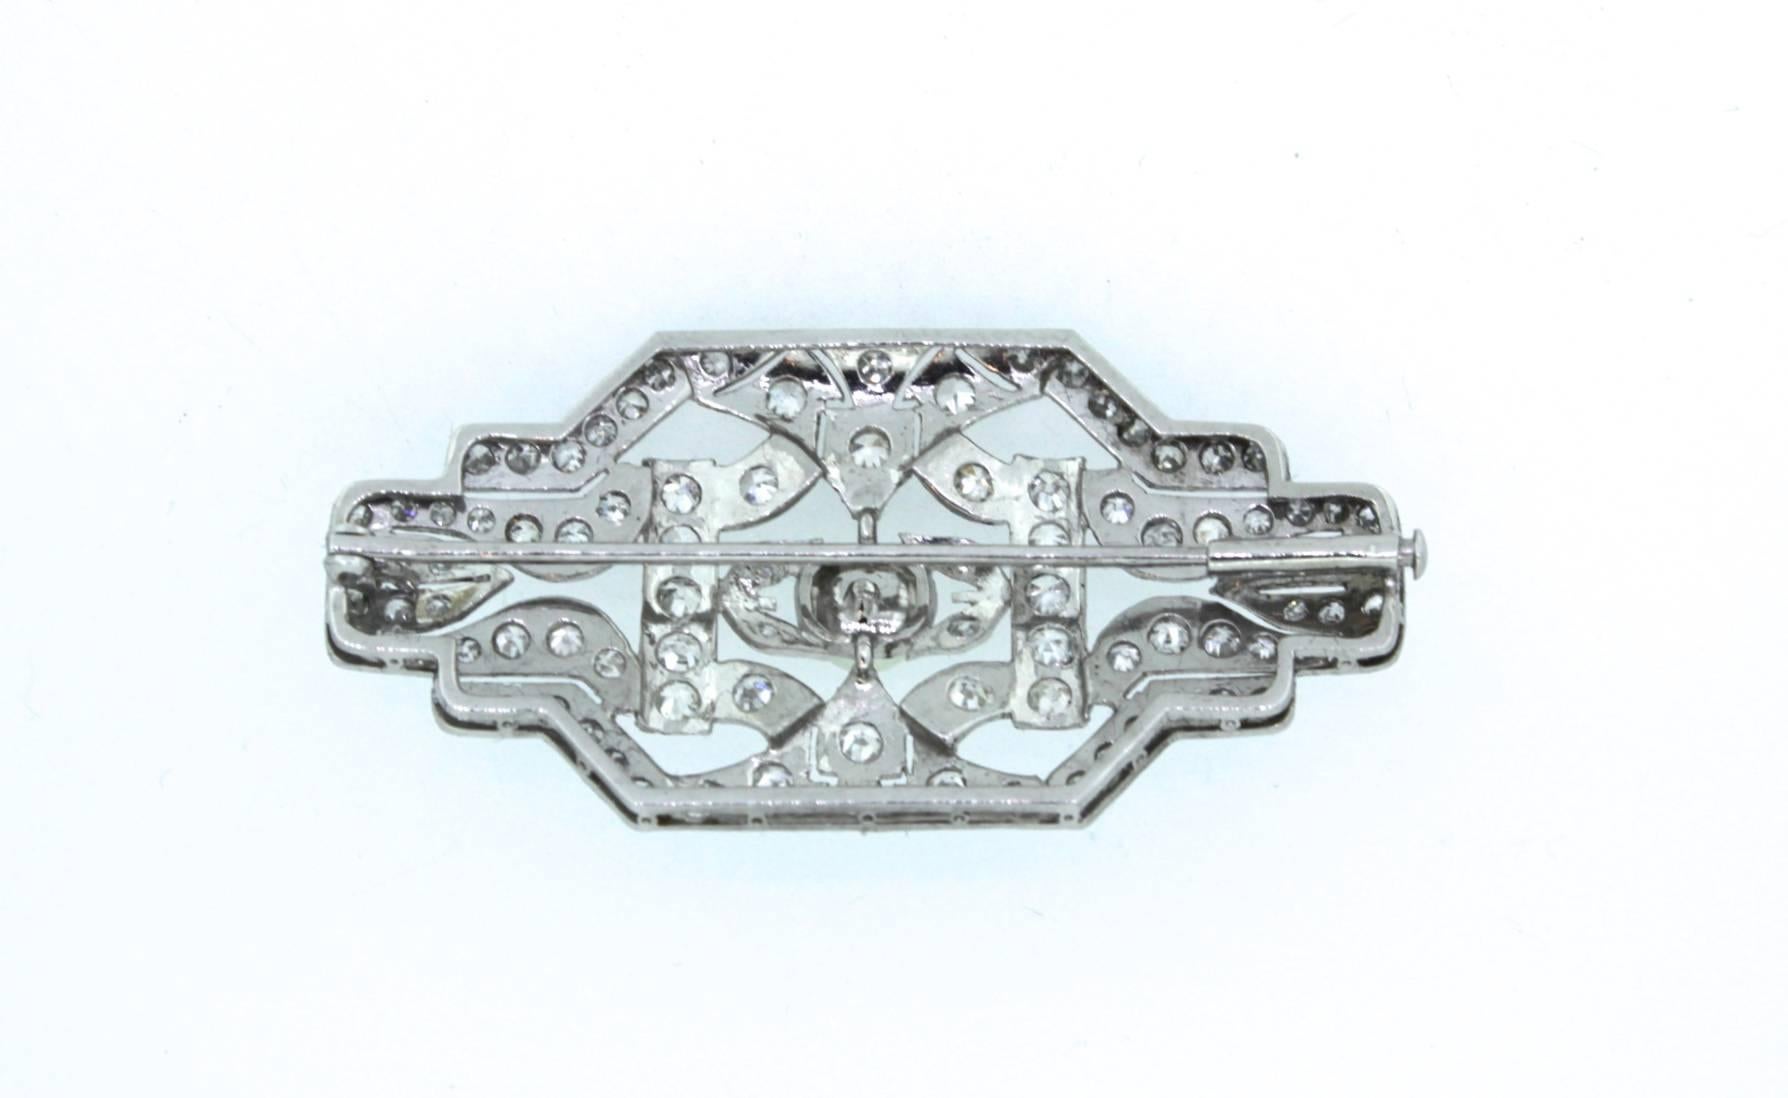 We are offering this antique Art-Deco brooche,

The white golden brooche Is beautifully decorated with diamonds, the amount in carat is over 1.50 carat and at the centre a natural pearl. 
The design is is classical Art Deco style with tight lines